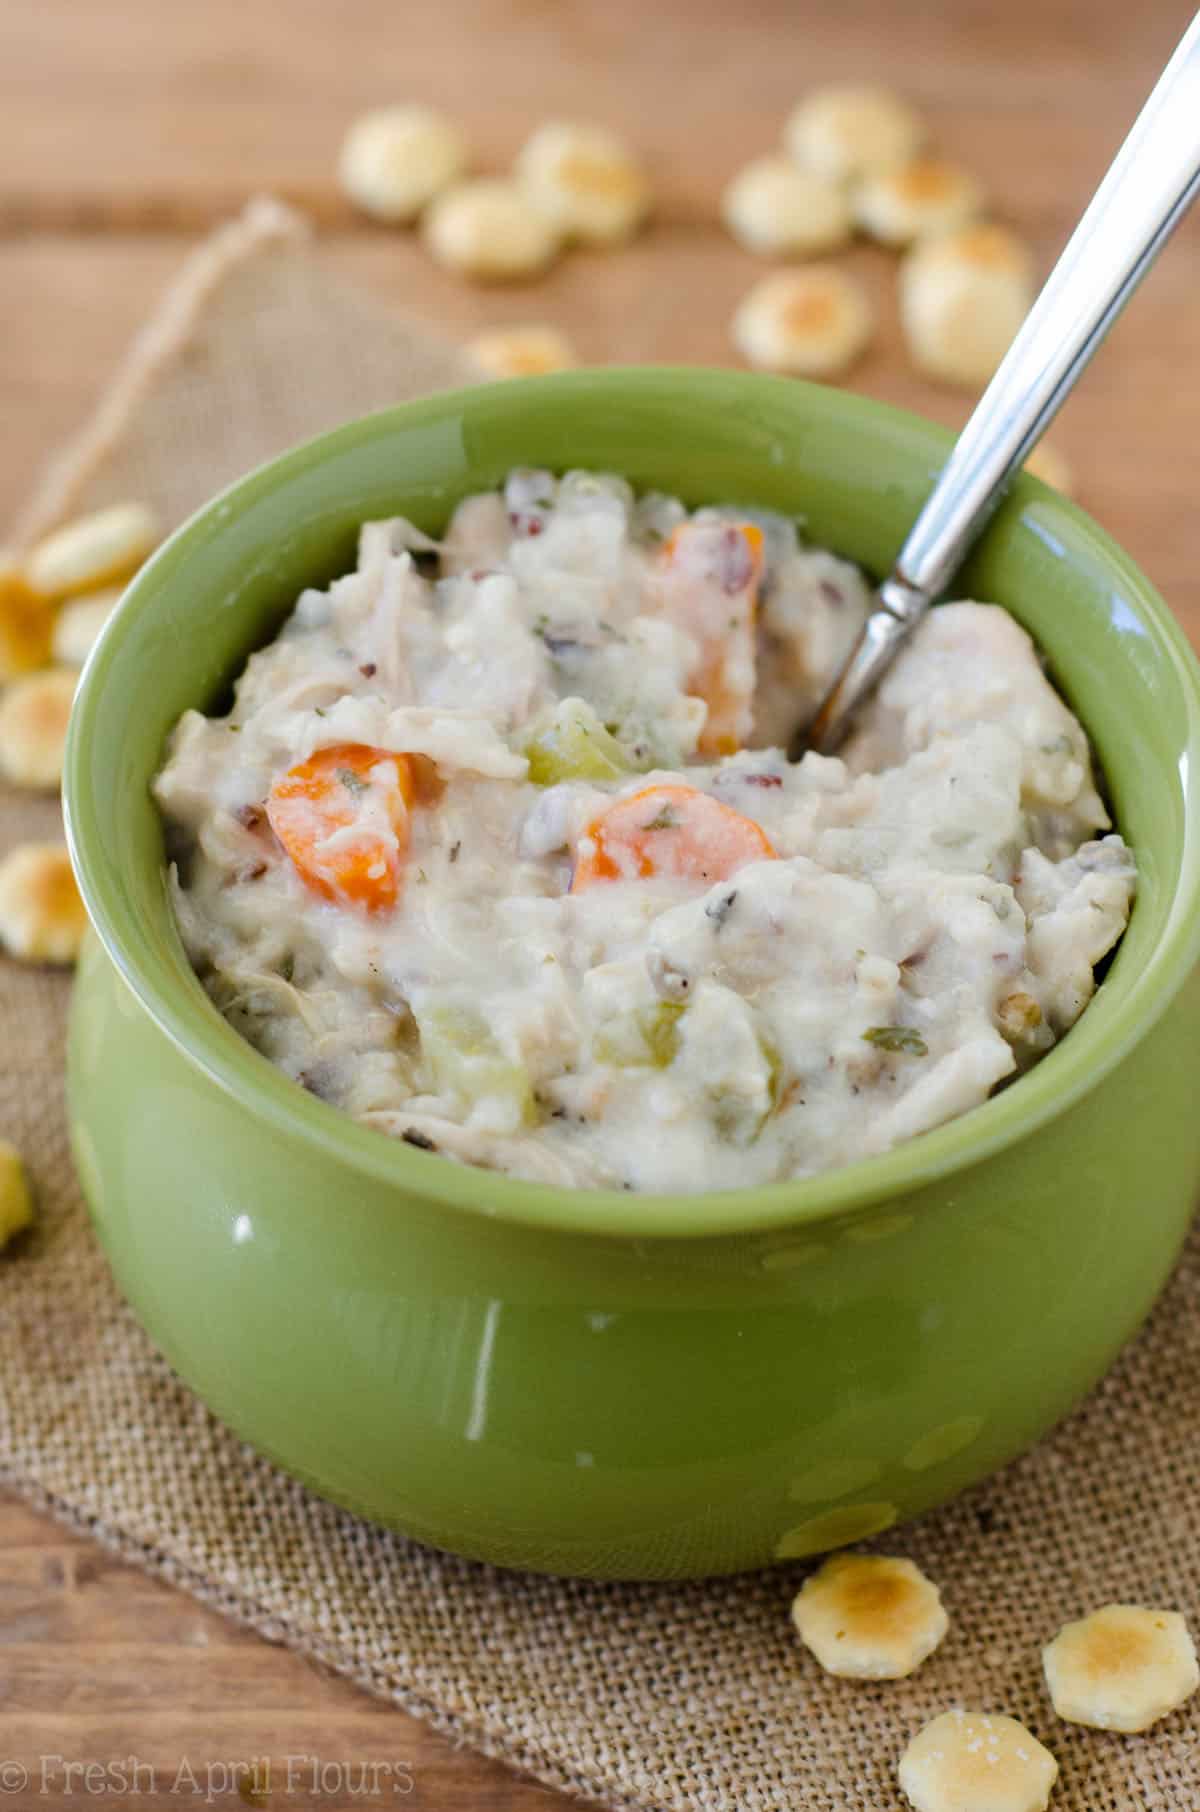 Slow Cooker Creamy Chicken and Wild Rice Soup: An easy set-it-and-forget-it recipe for creamy chicken and wild rice soup for the slow cooker. Perfect for cold weather and freezing for on-hand meals.